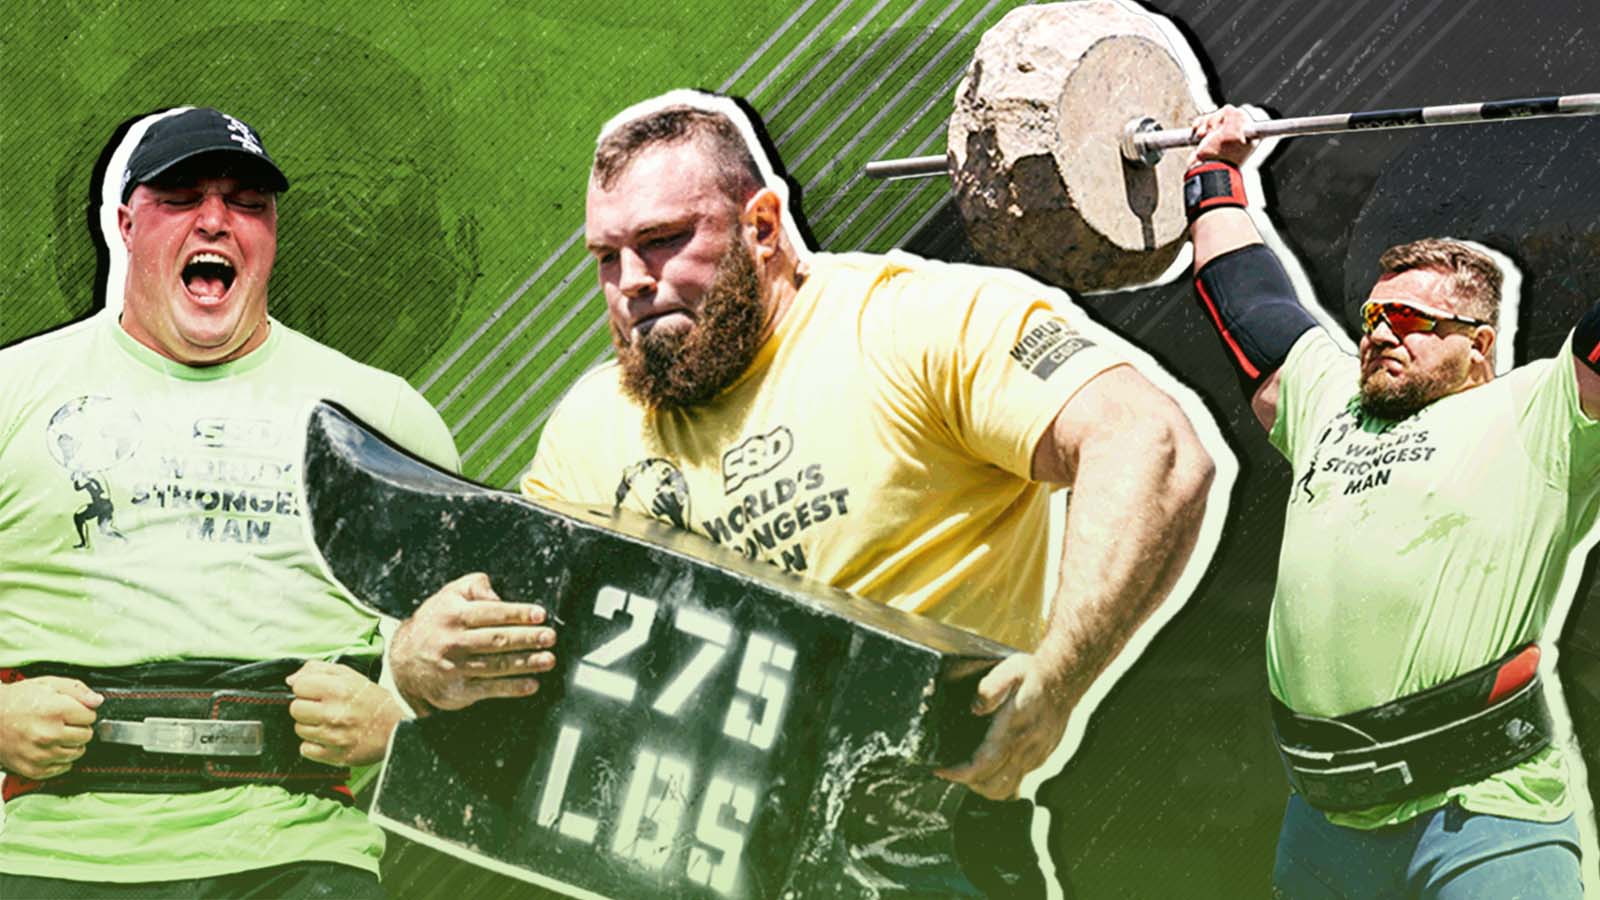 2023 World's Strongest Man Results and Leaderboard BarBend